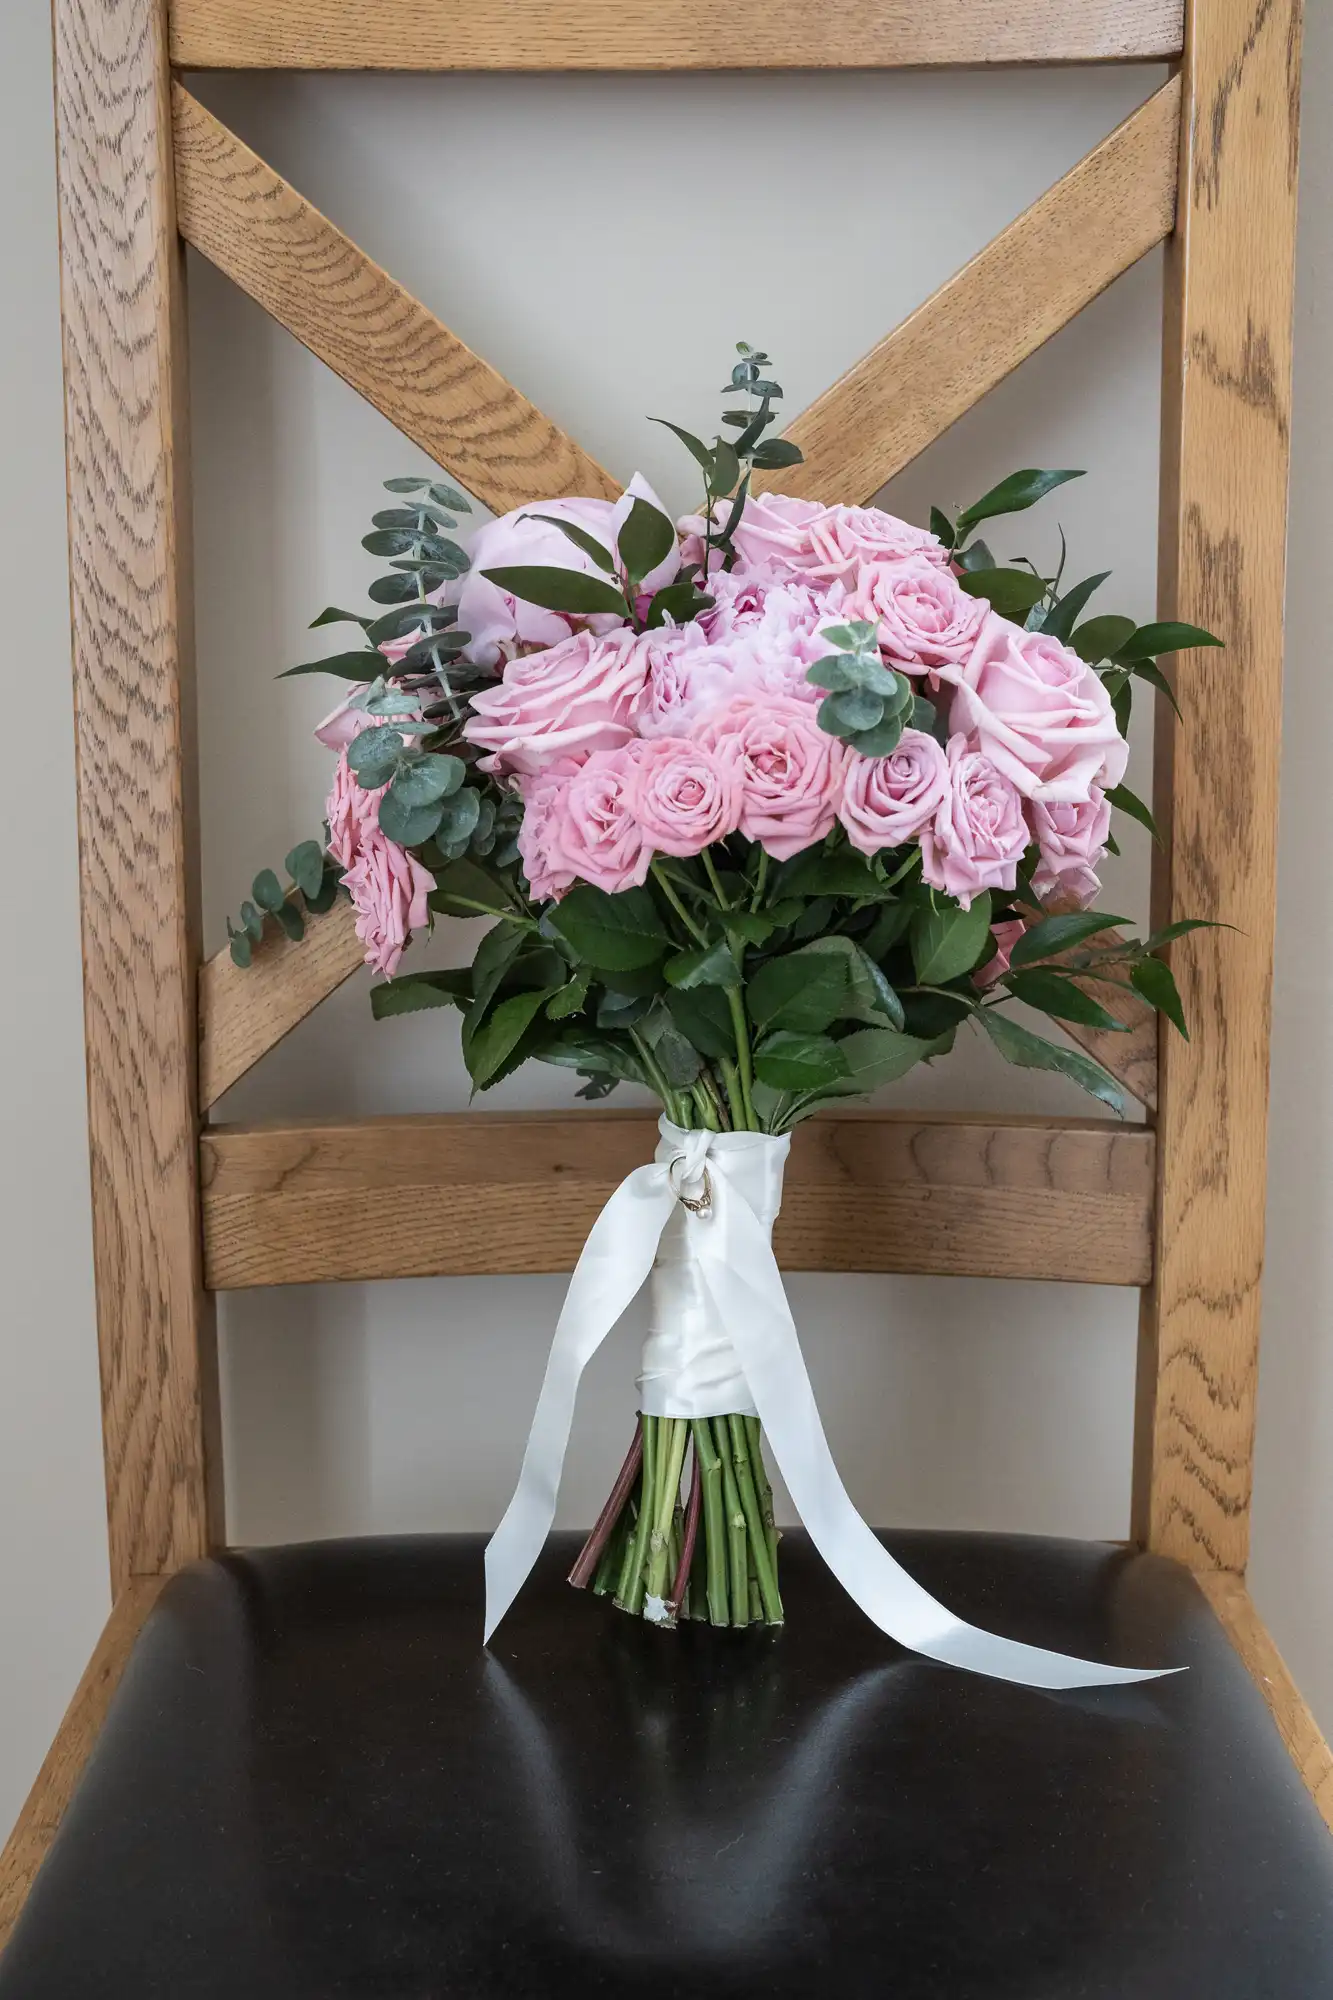 A bouquet of pink roses tied with a white ribbon, resting on a wooden chair against a beige wall.